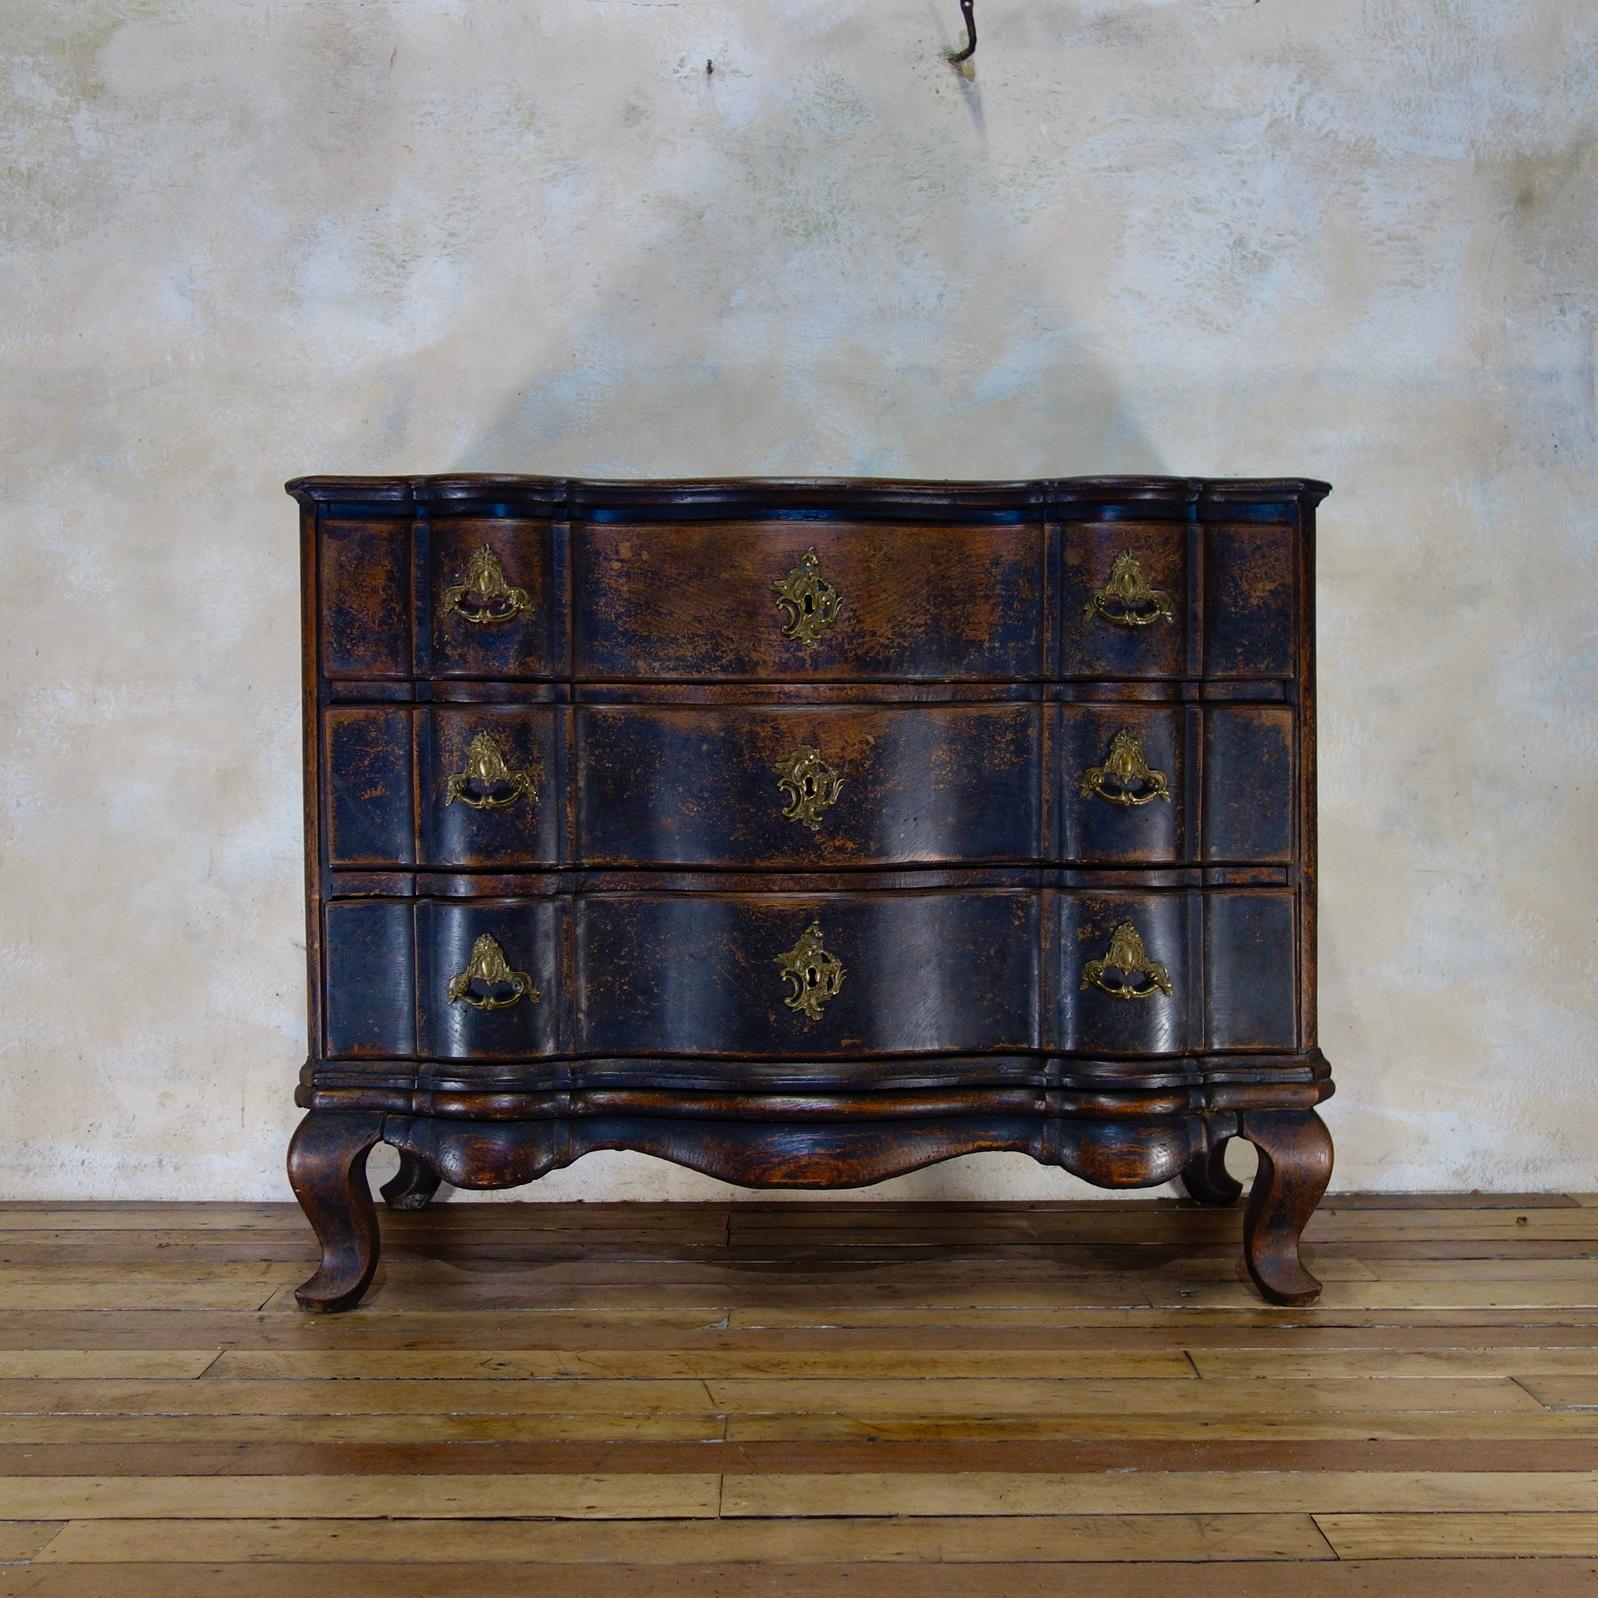 Italian A Large 18th Century Danish Baroque Ebonized Commode Painted Chest of Drawers